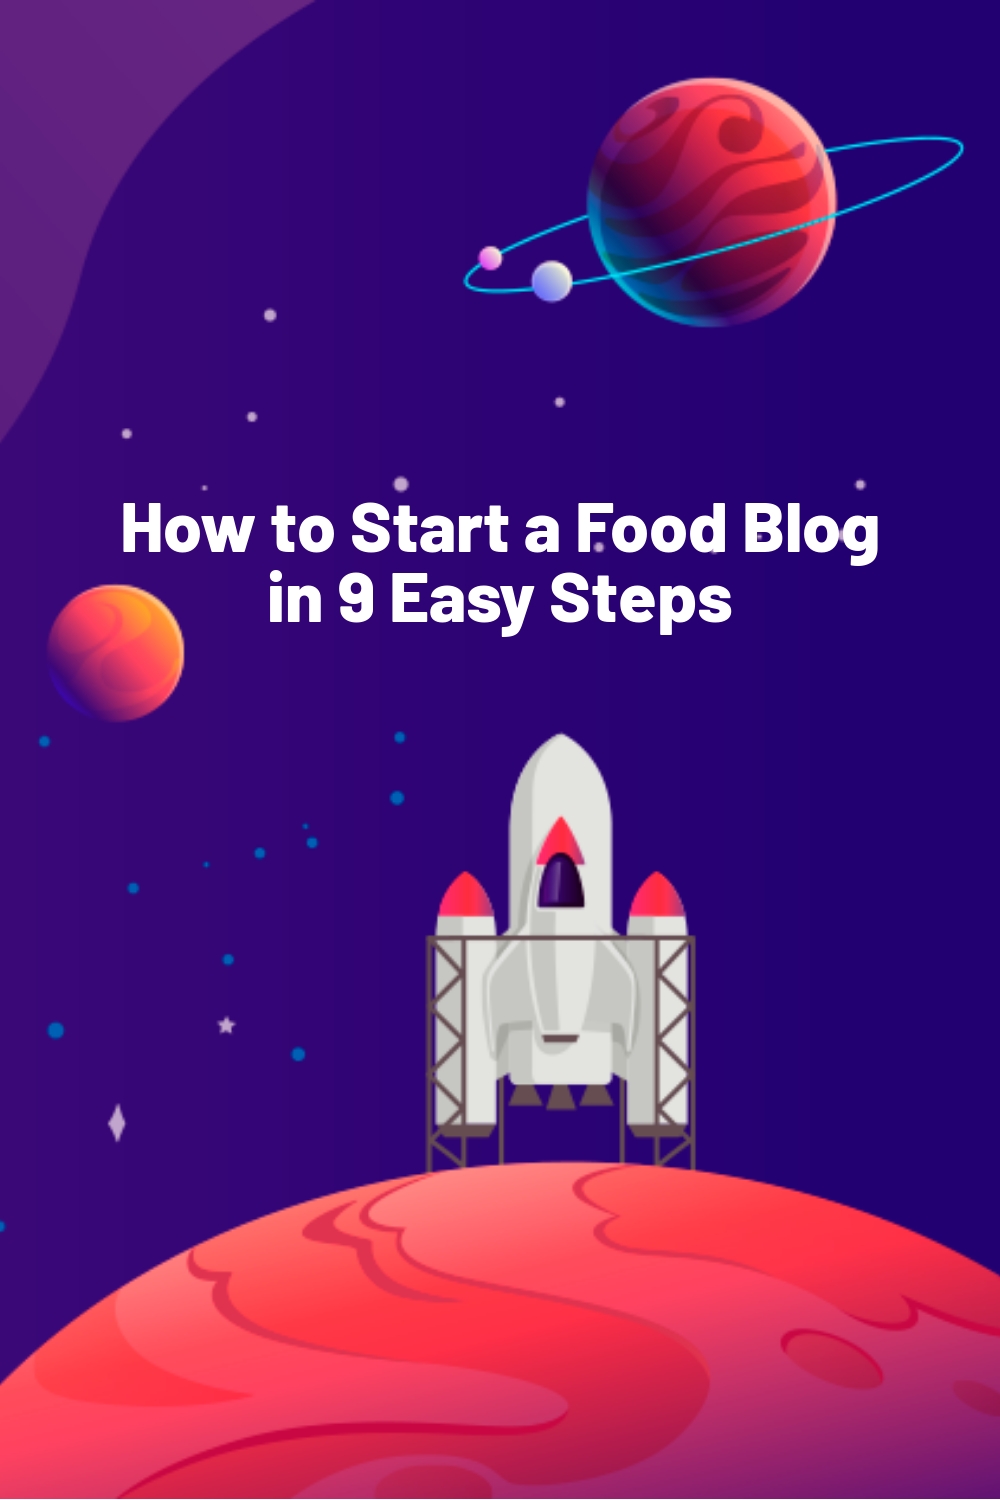 How to Start a Food Blog in 9 Easy Steps